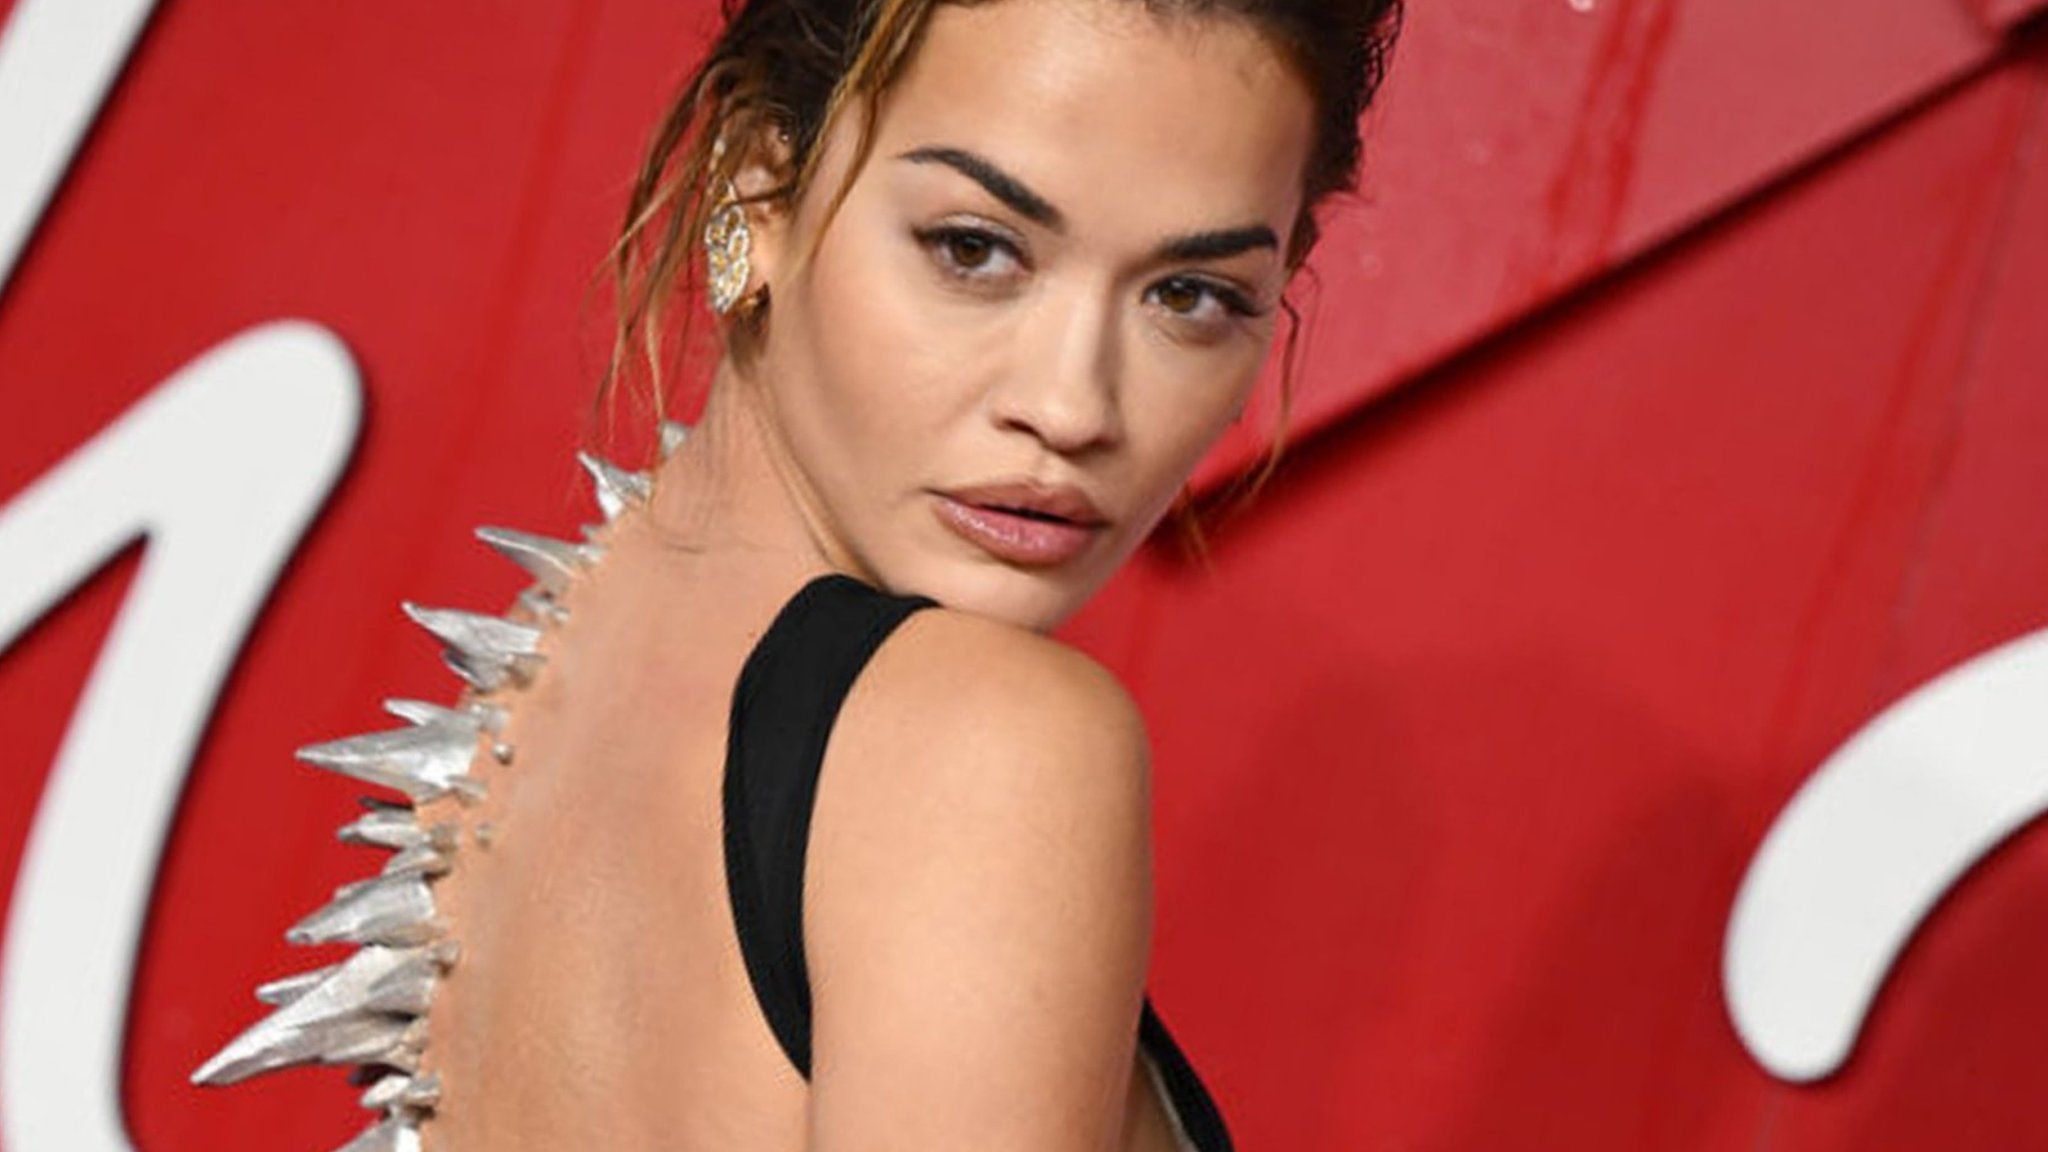 Rita Ora attends The Fashion Awards 2023 Presented by Pandora at the Royal Albert Hall on December 04, 2023 in London, England.